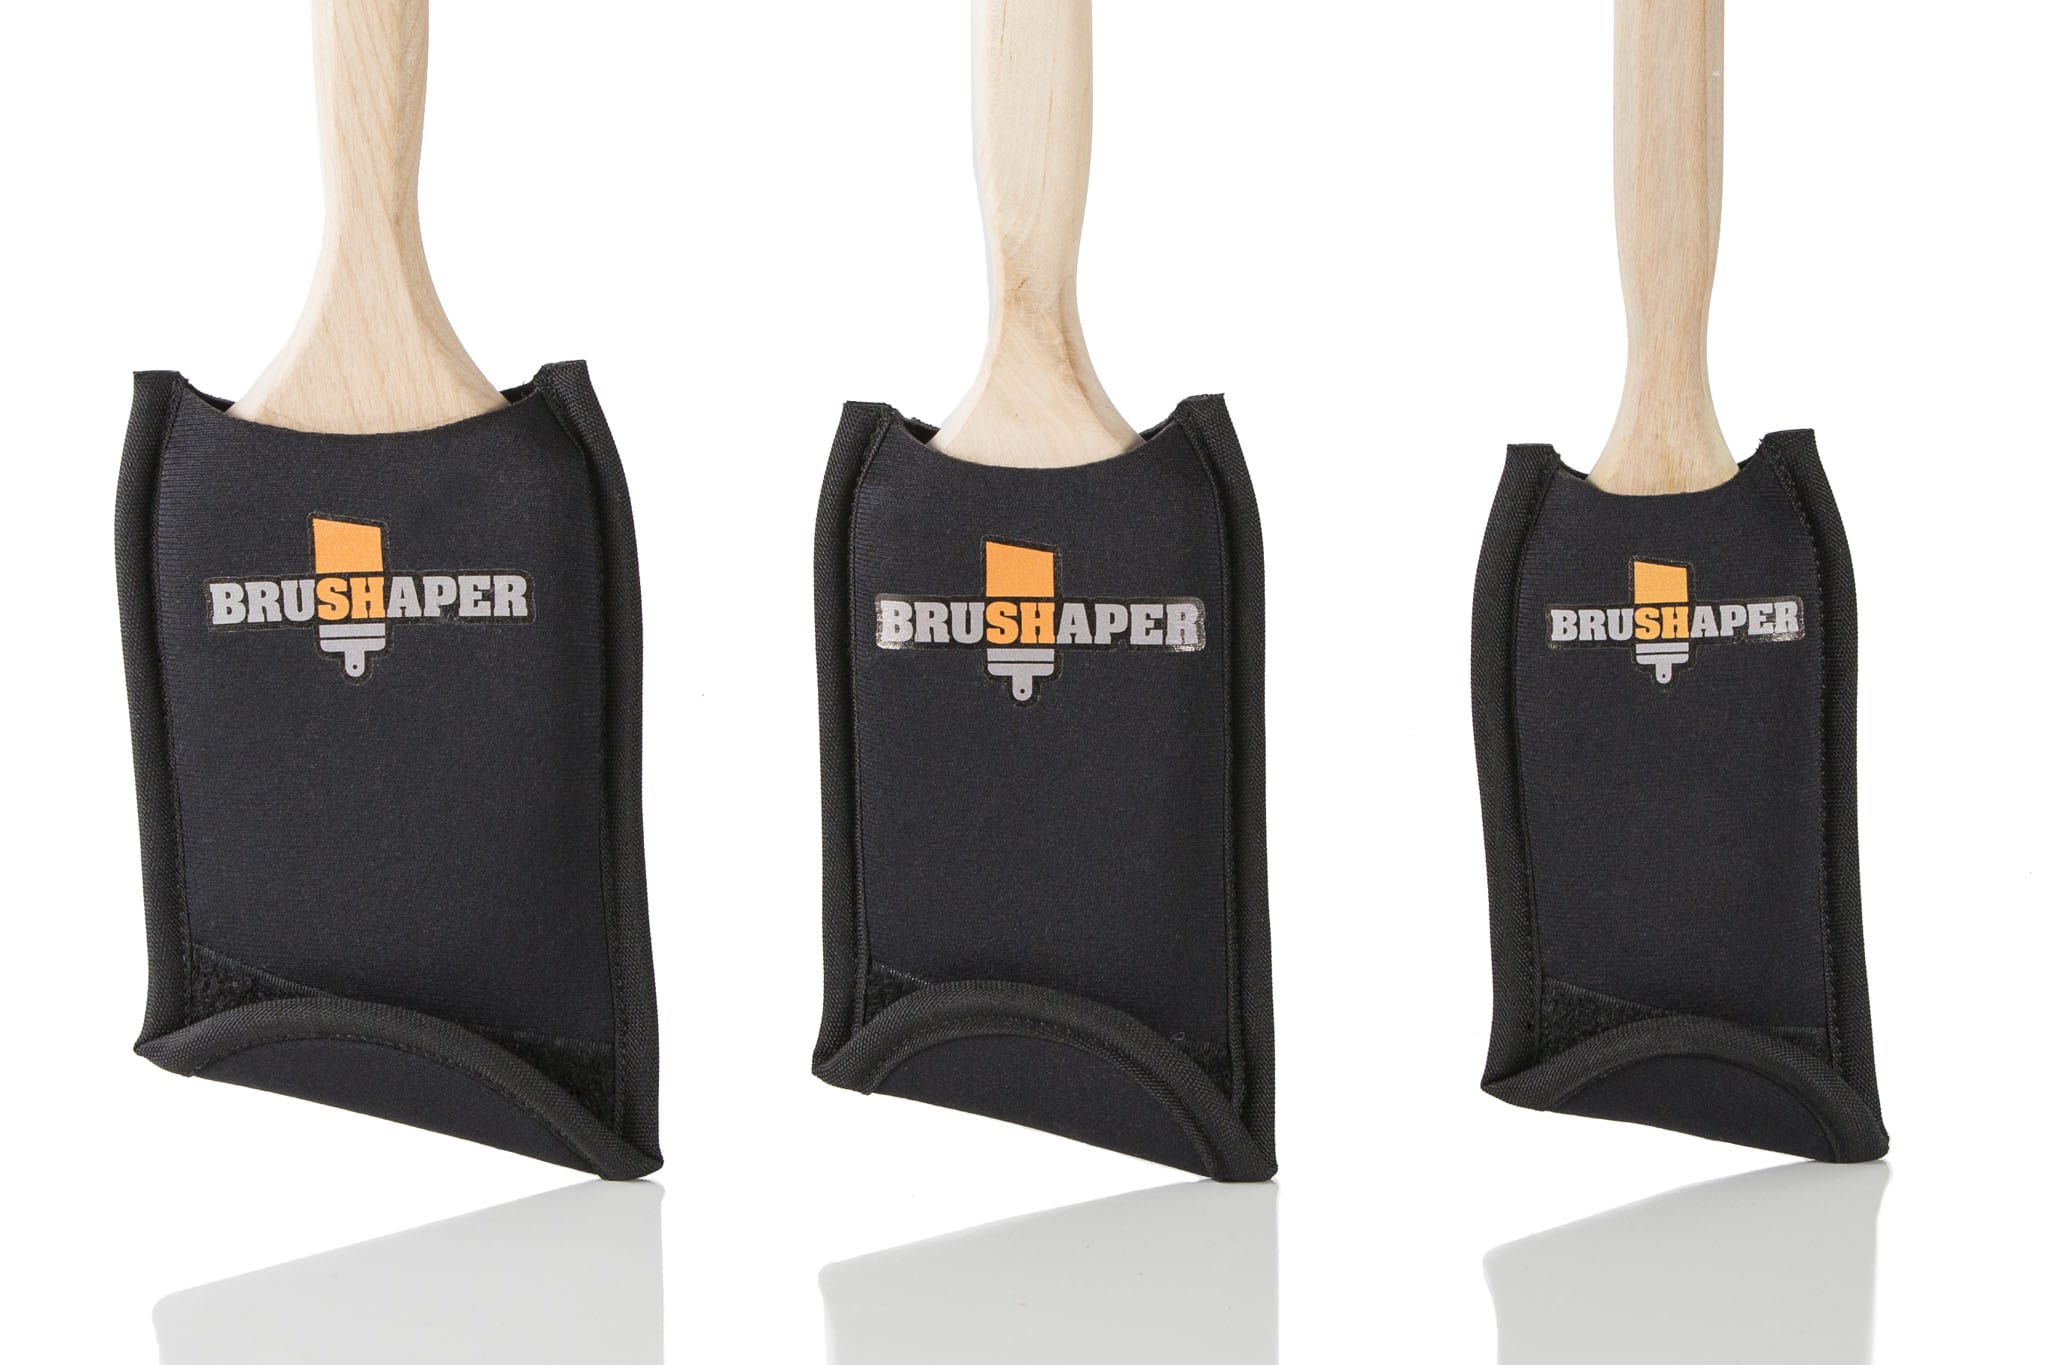 BRUSHAPER OFFERS NEW WAY TO STORE AND DRY PAINT BRUSHES